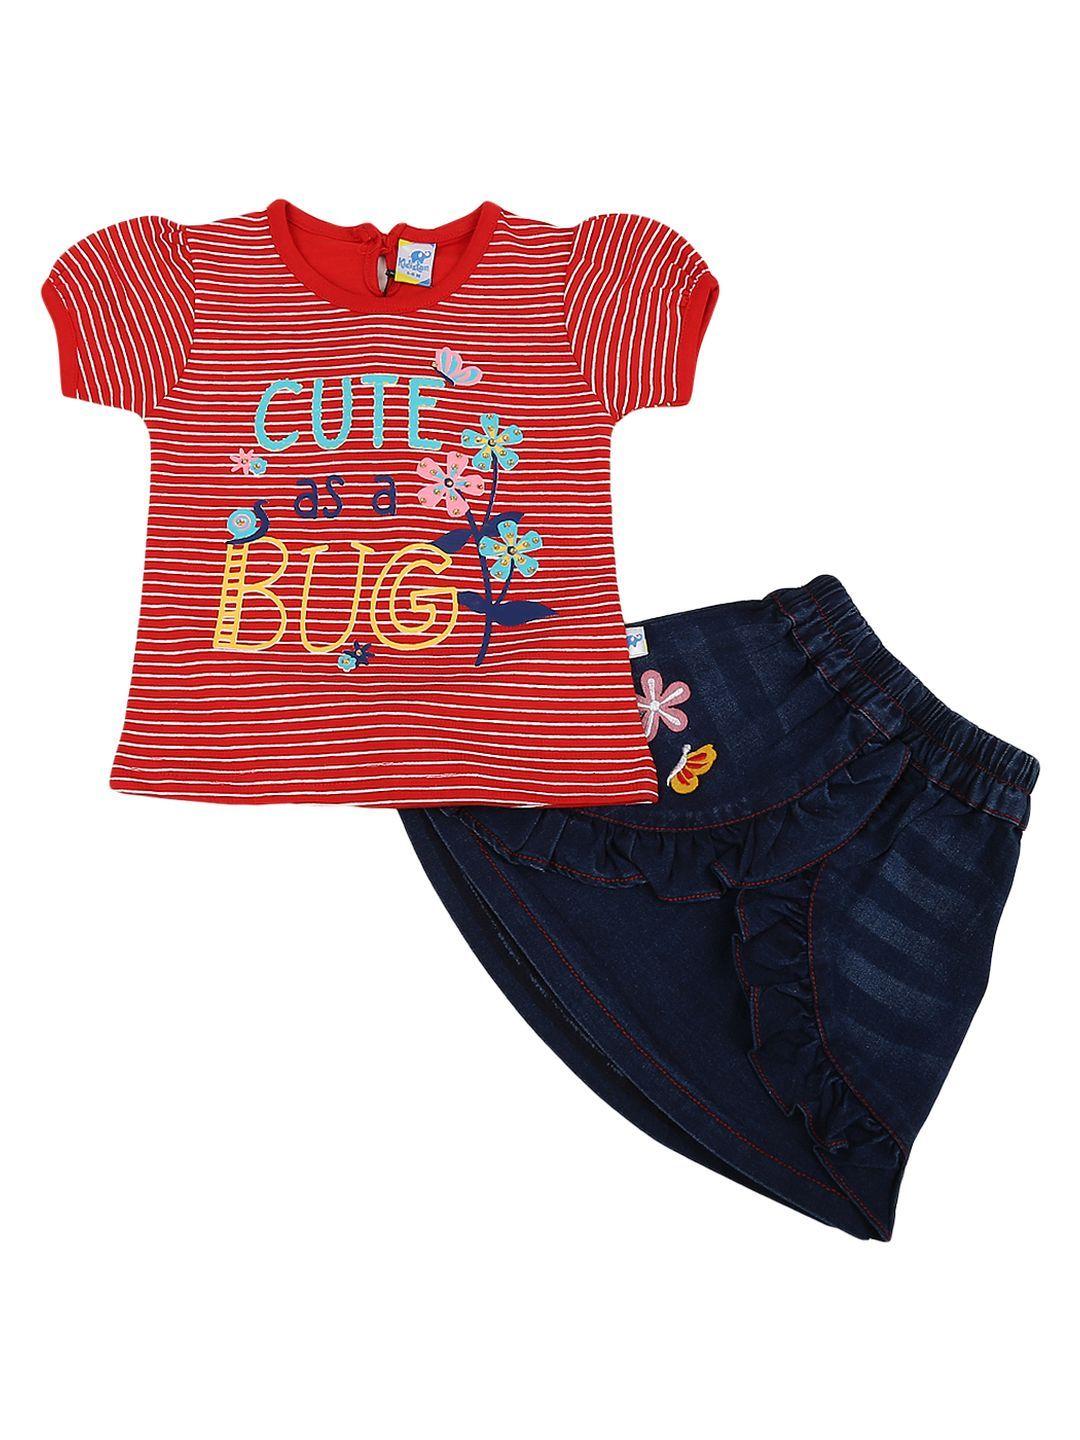 v-mart unisex kids red & blue printed top with skirt